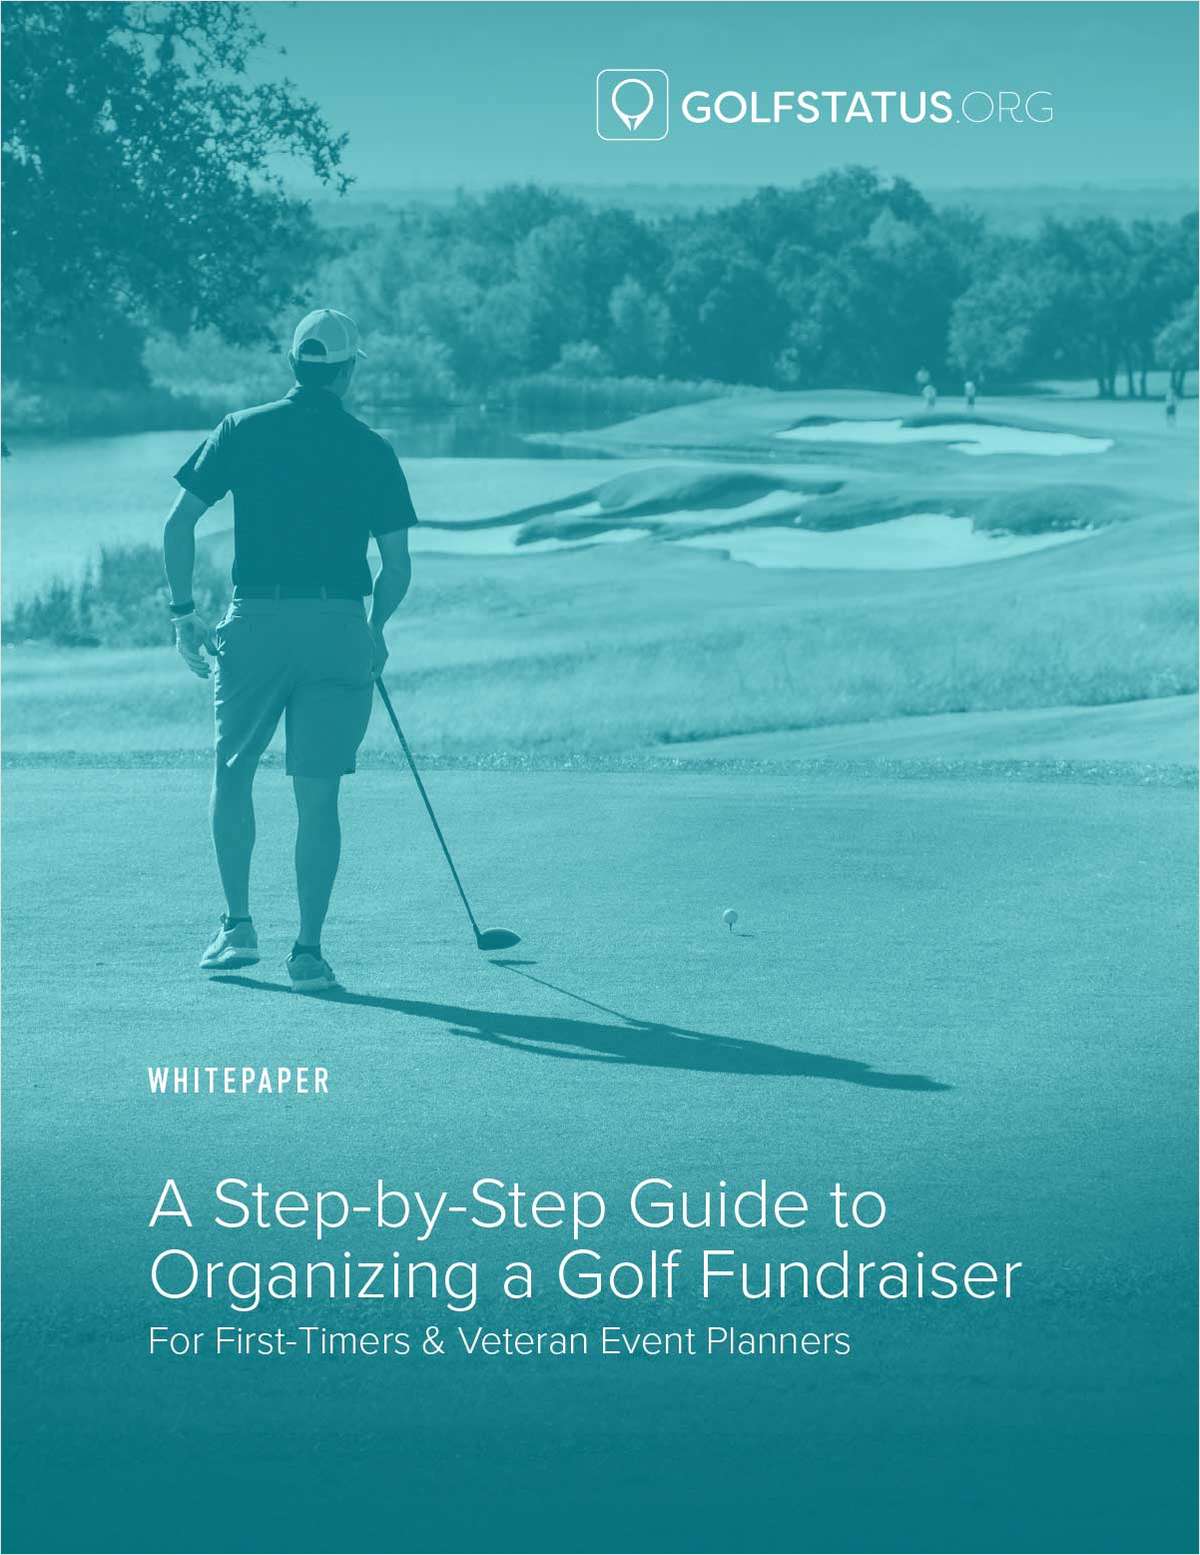 A Step-by-Step Guide to Organizing a Golf Fundraiser